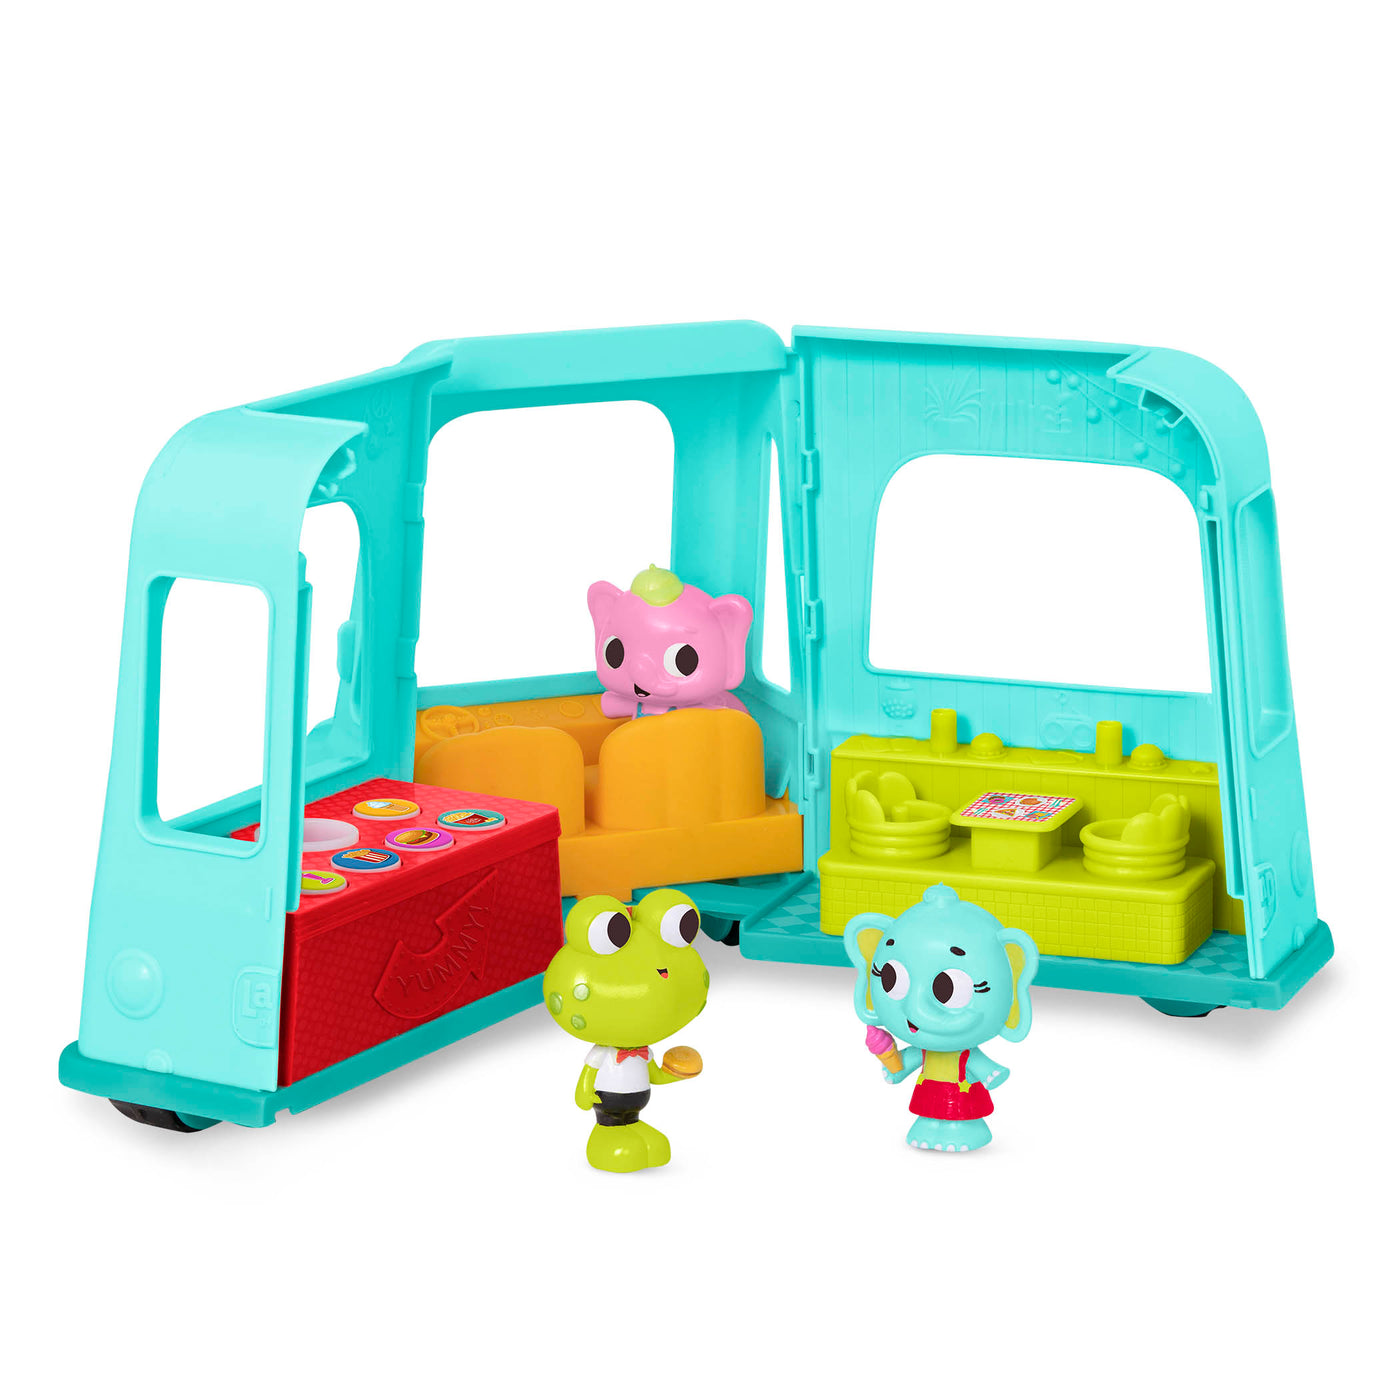 Toy food truck with 3 characters and stickers.